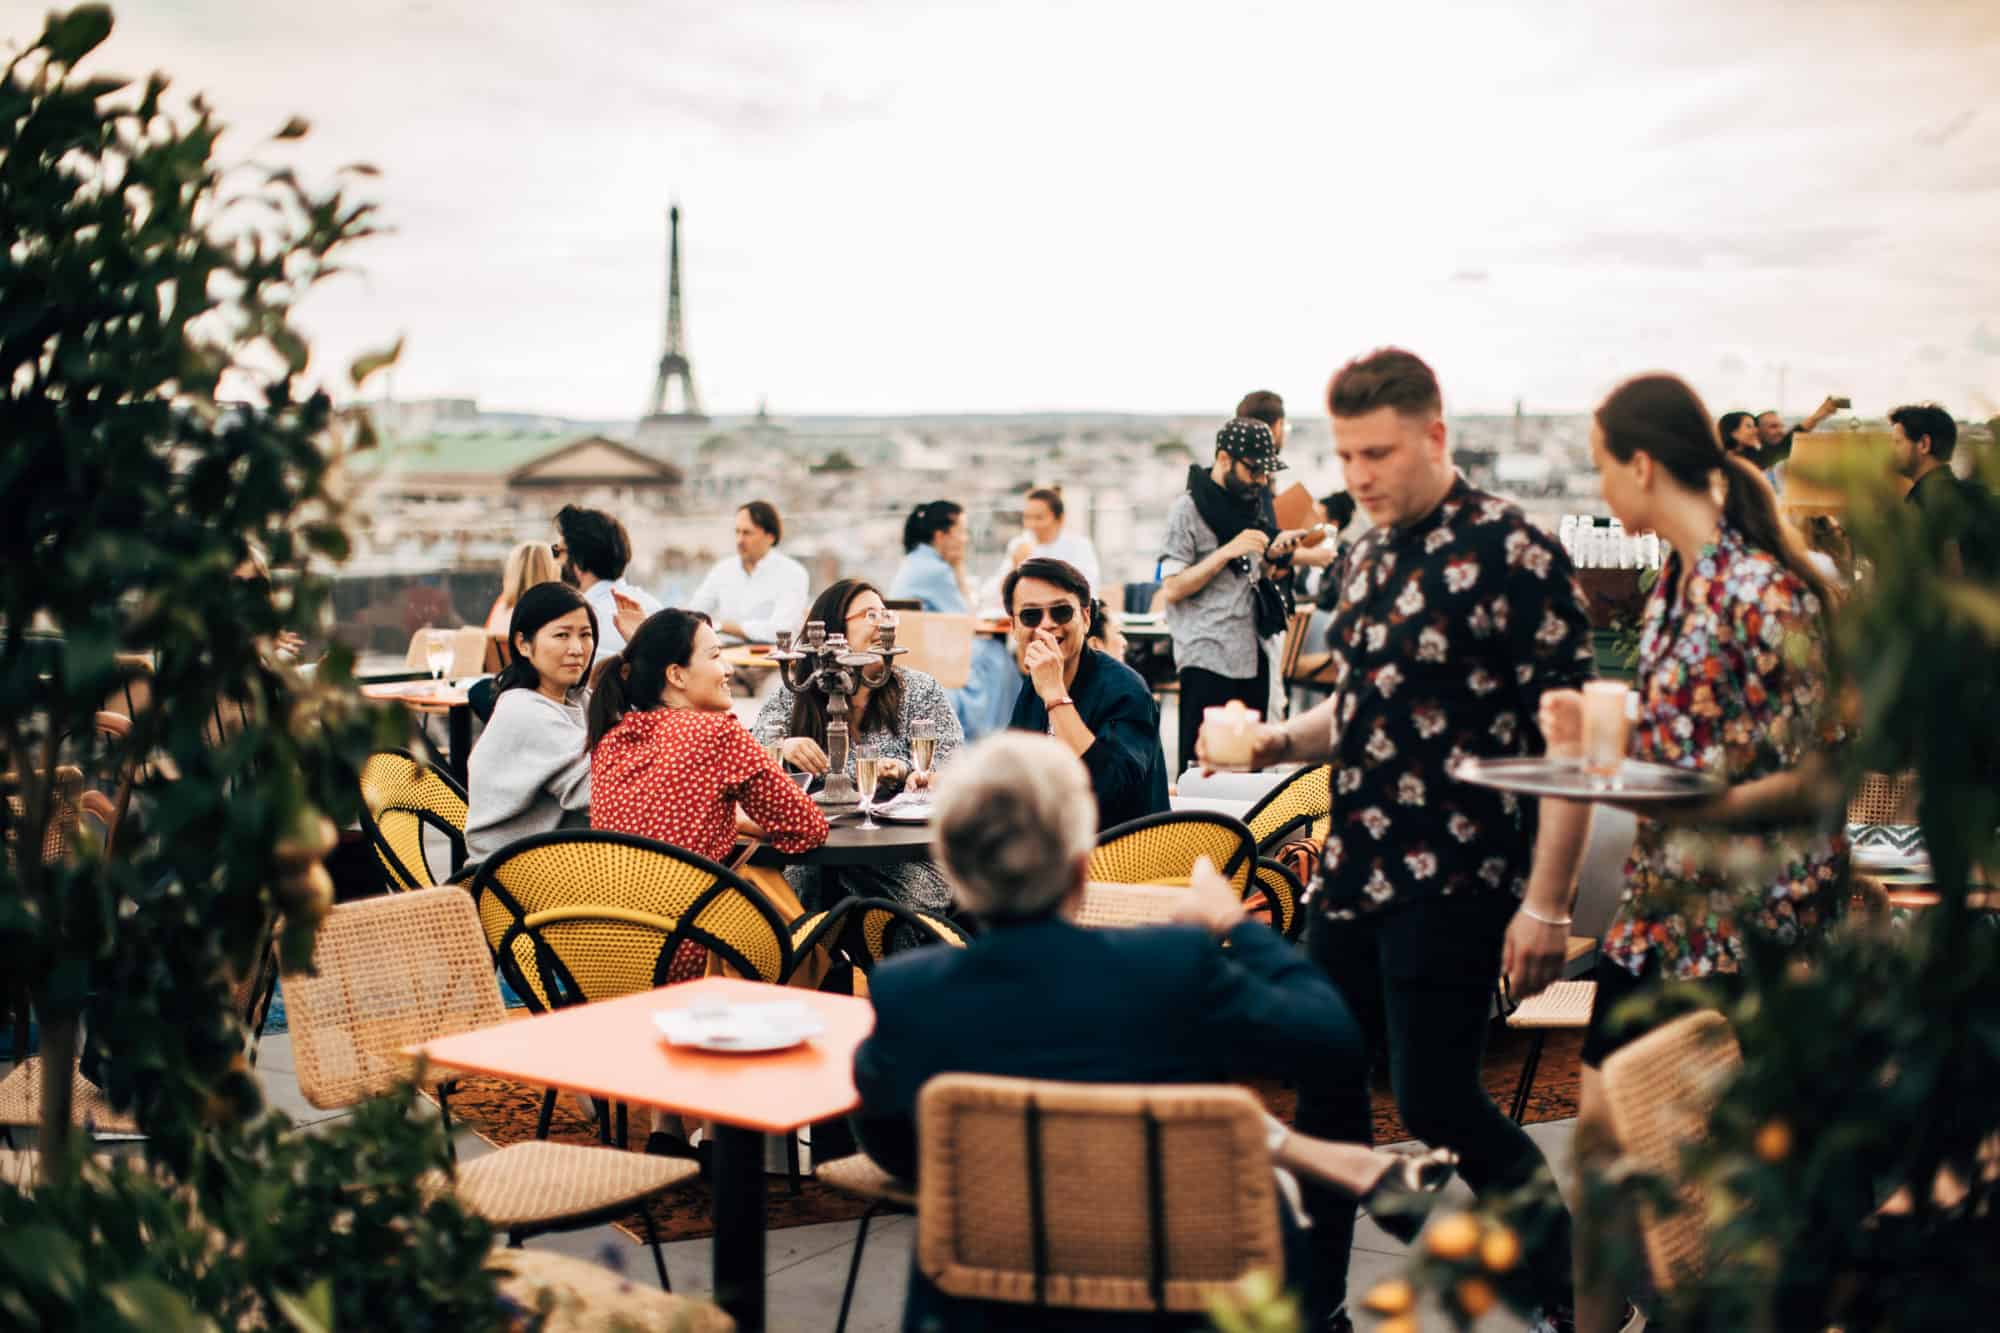 New rooftop bar in Paris, Creatures, has a great view of the Eiffel Tower.